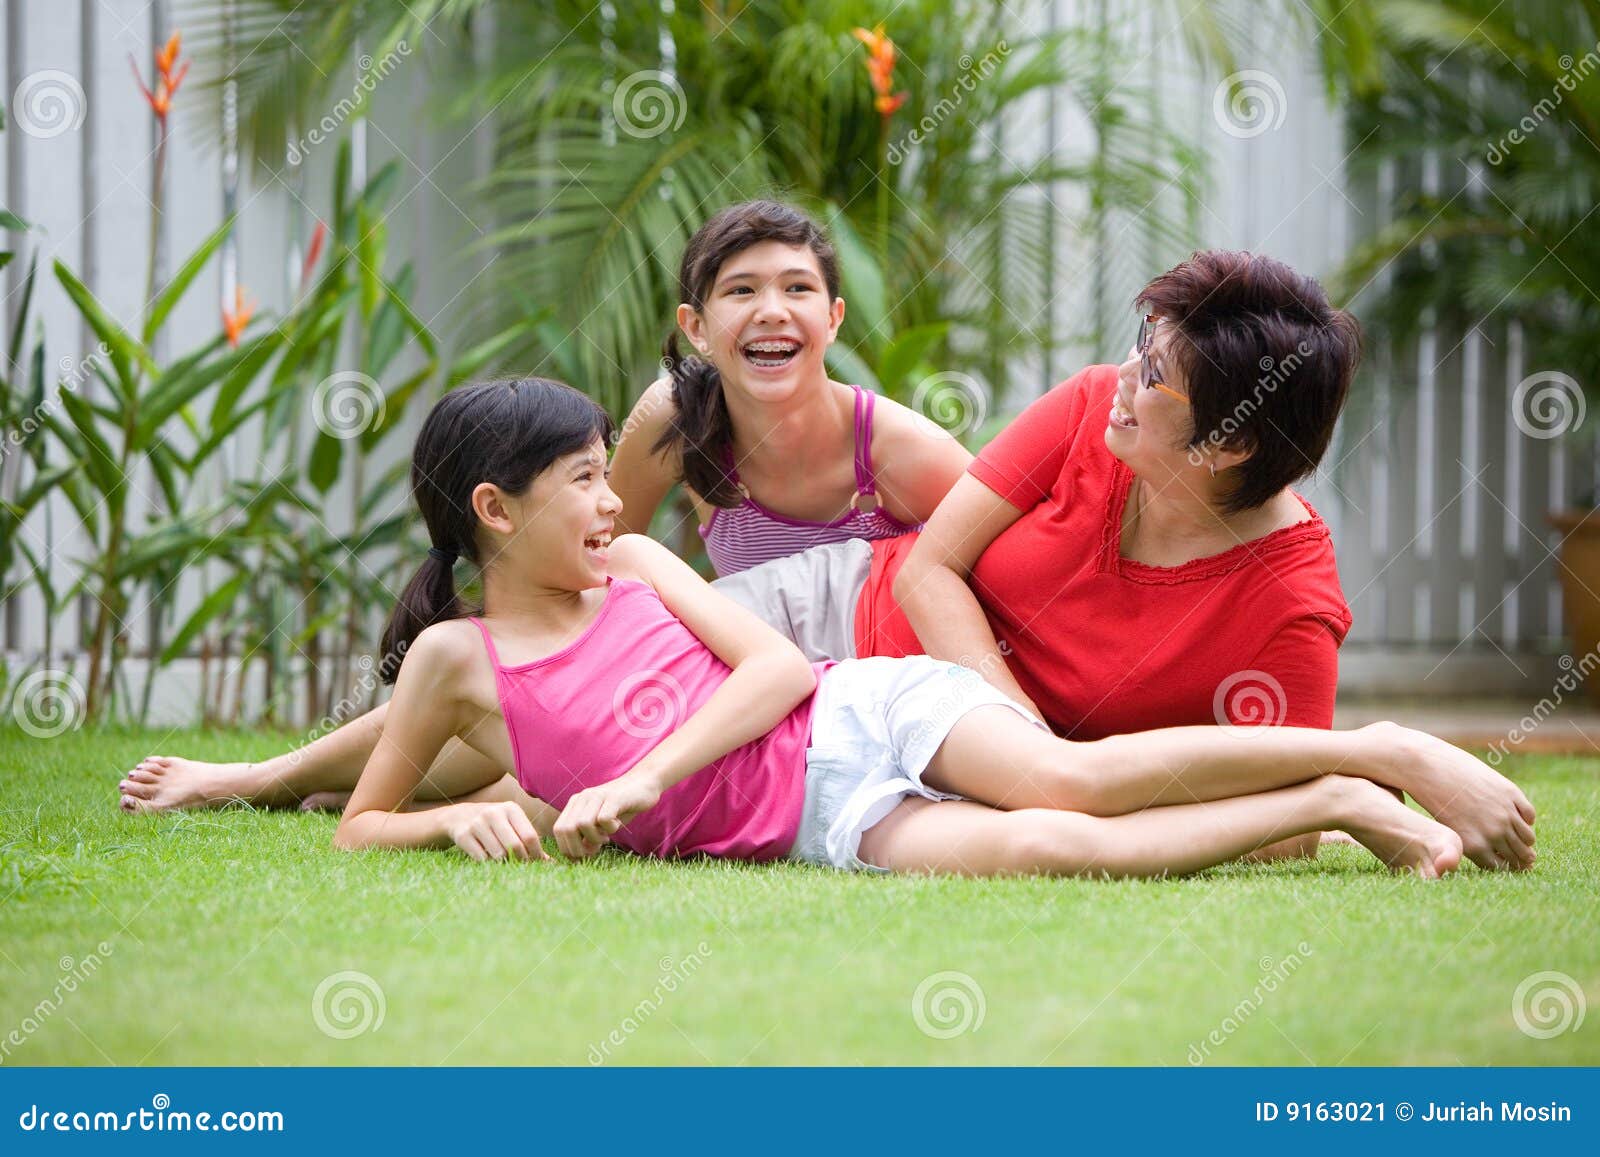 Asian Mom Having Fun With Her Girls Stock Image Image 9163021